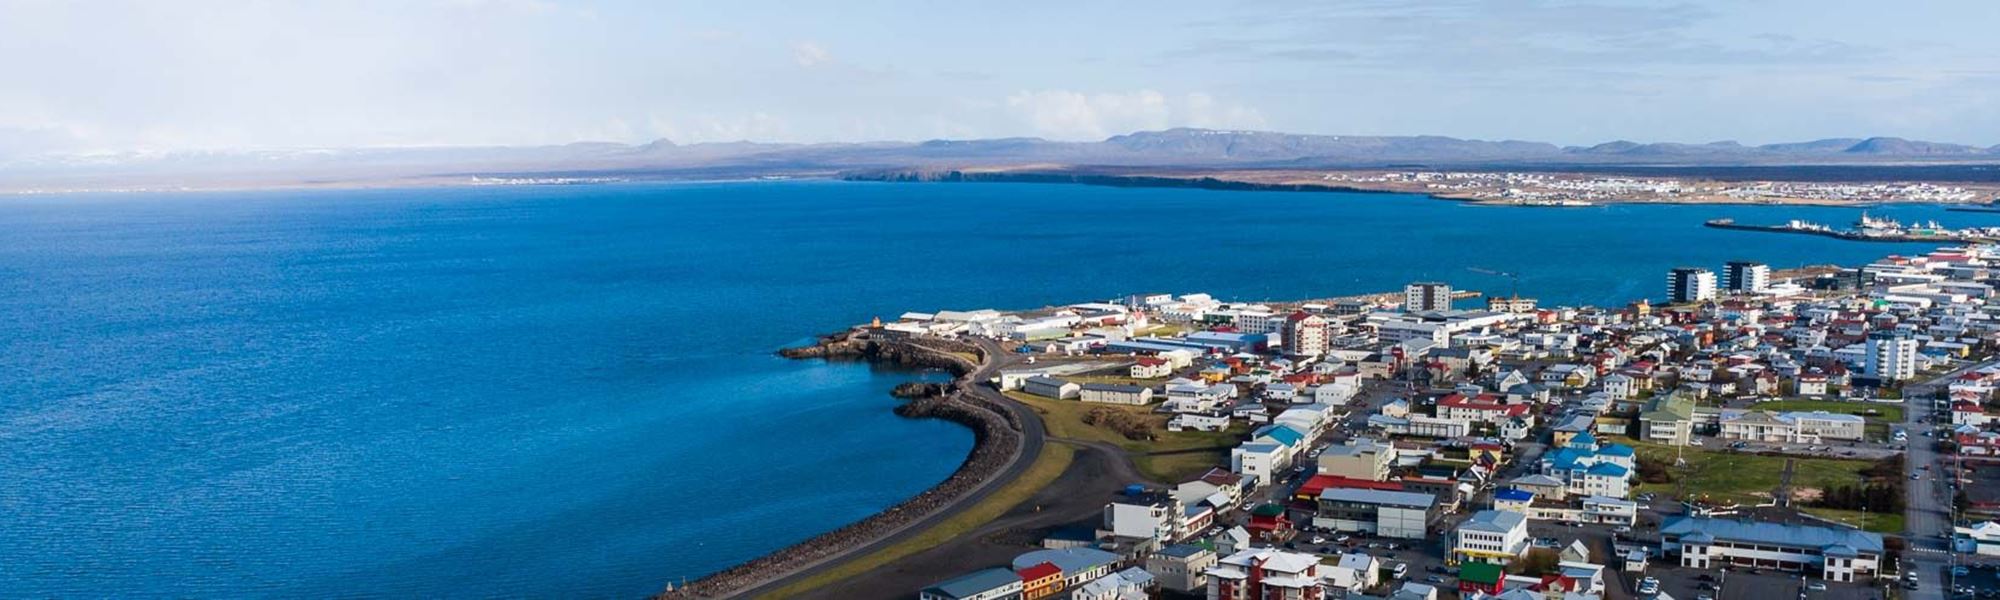 iceland main tourist attractions